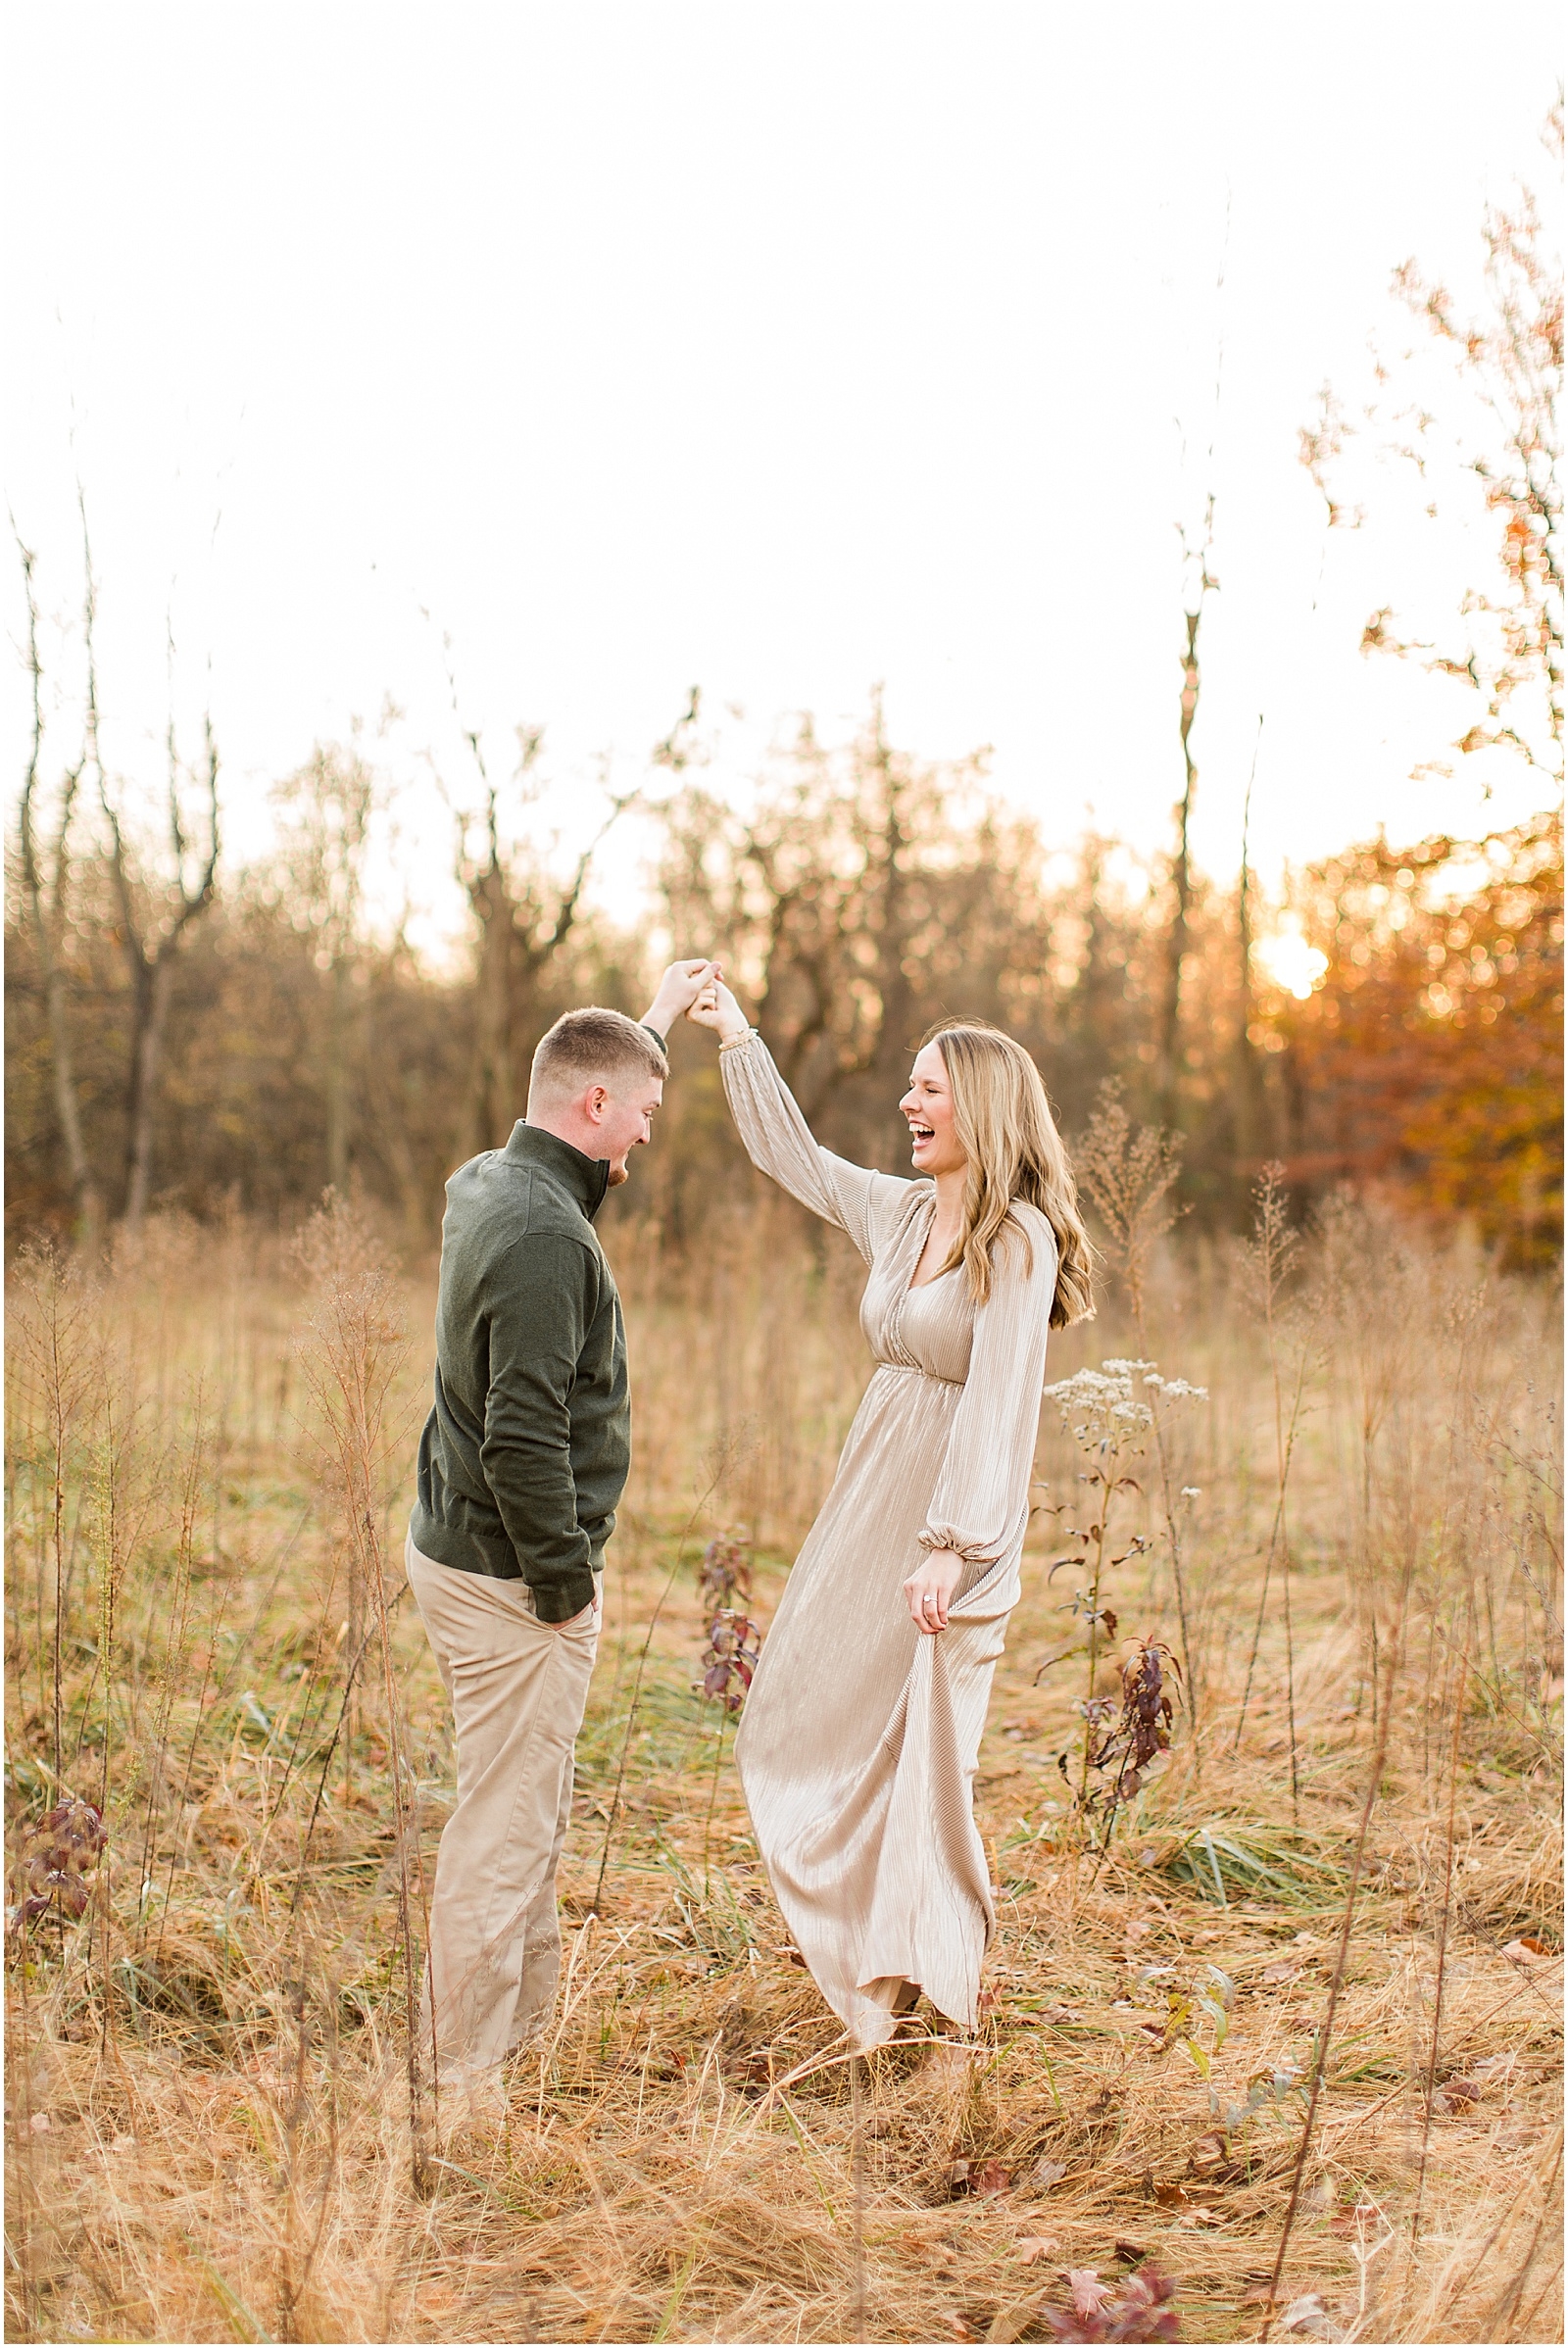 A Fall Southern Indiana Engagement Seesion | Cody and Hannah | Bret and Brandie Photography 045.jpg